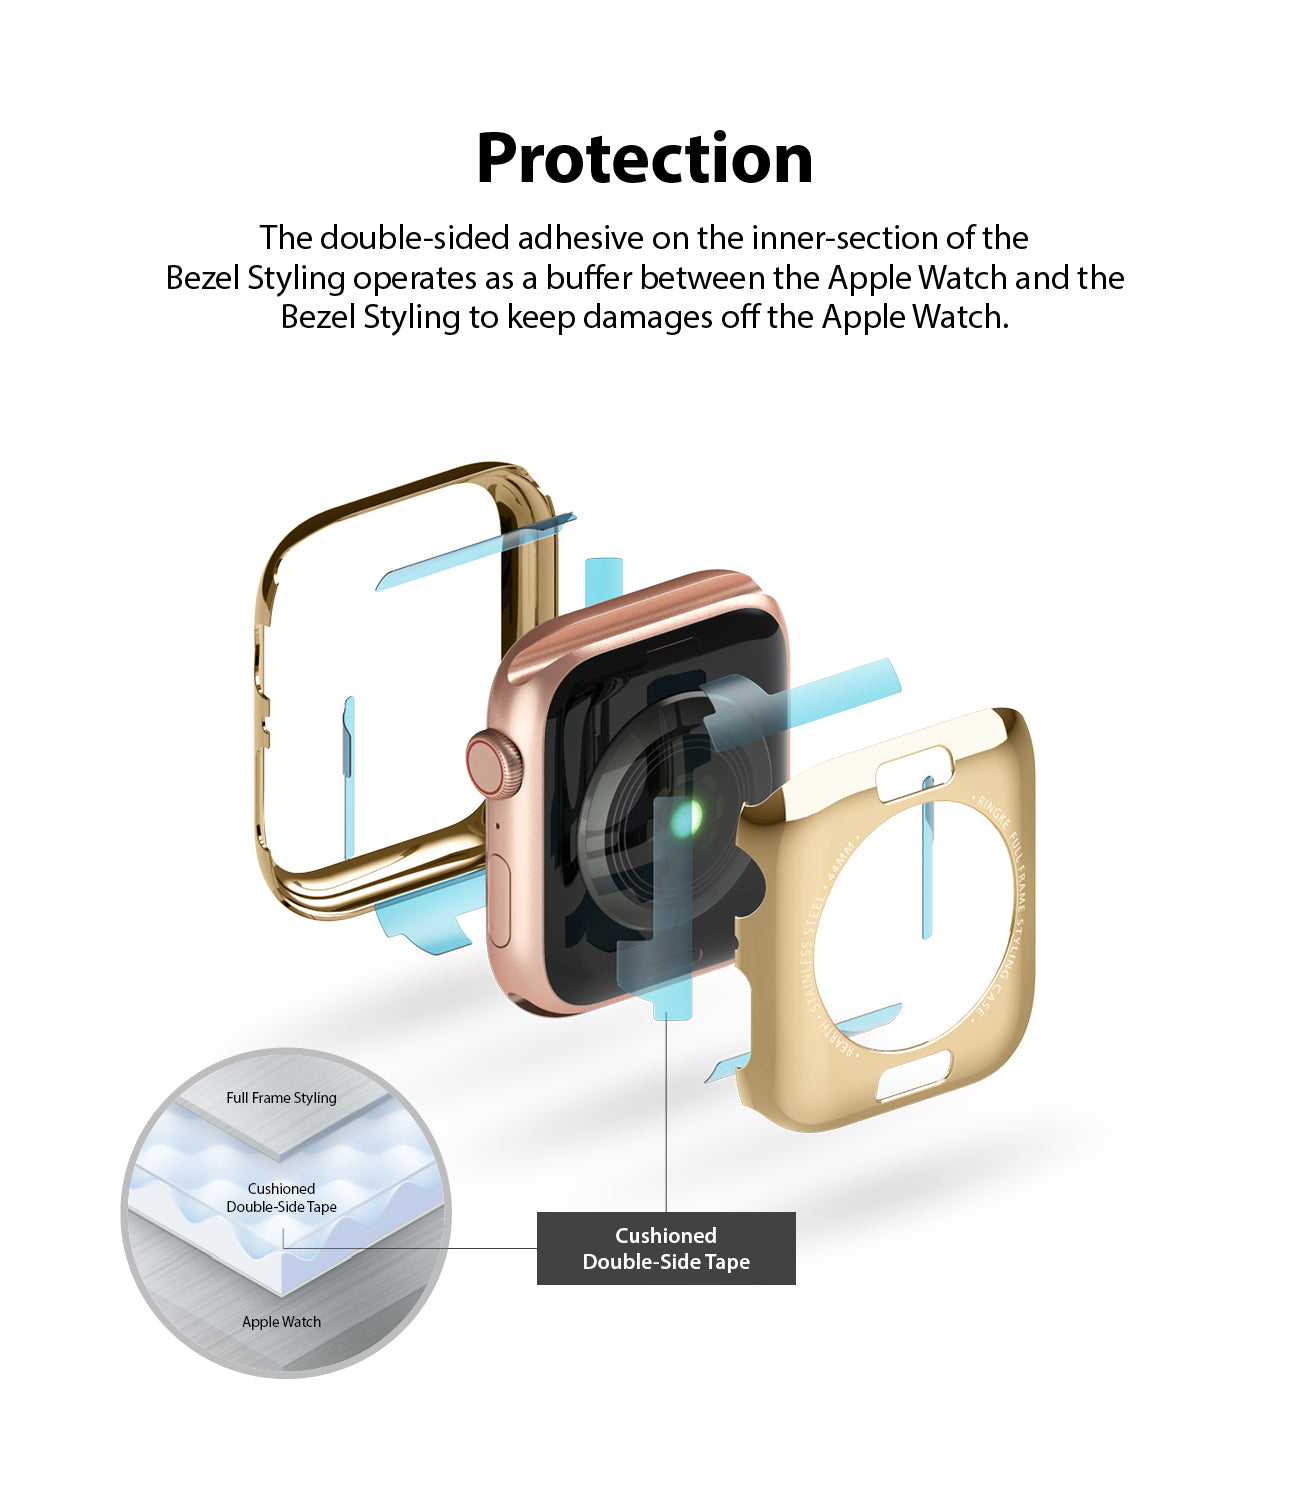 the double sided adhesive on the inner section of the bezel styling operates as a buffer between the apple watch and the bezel styling to keep damages off the watch